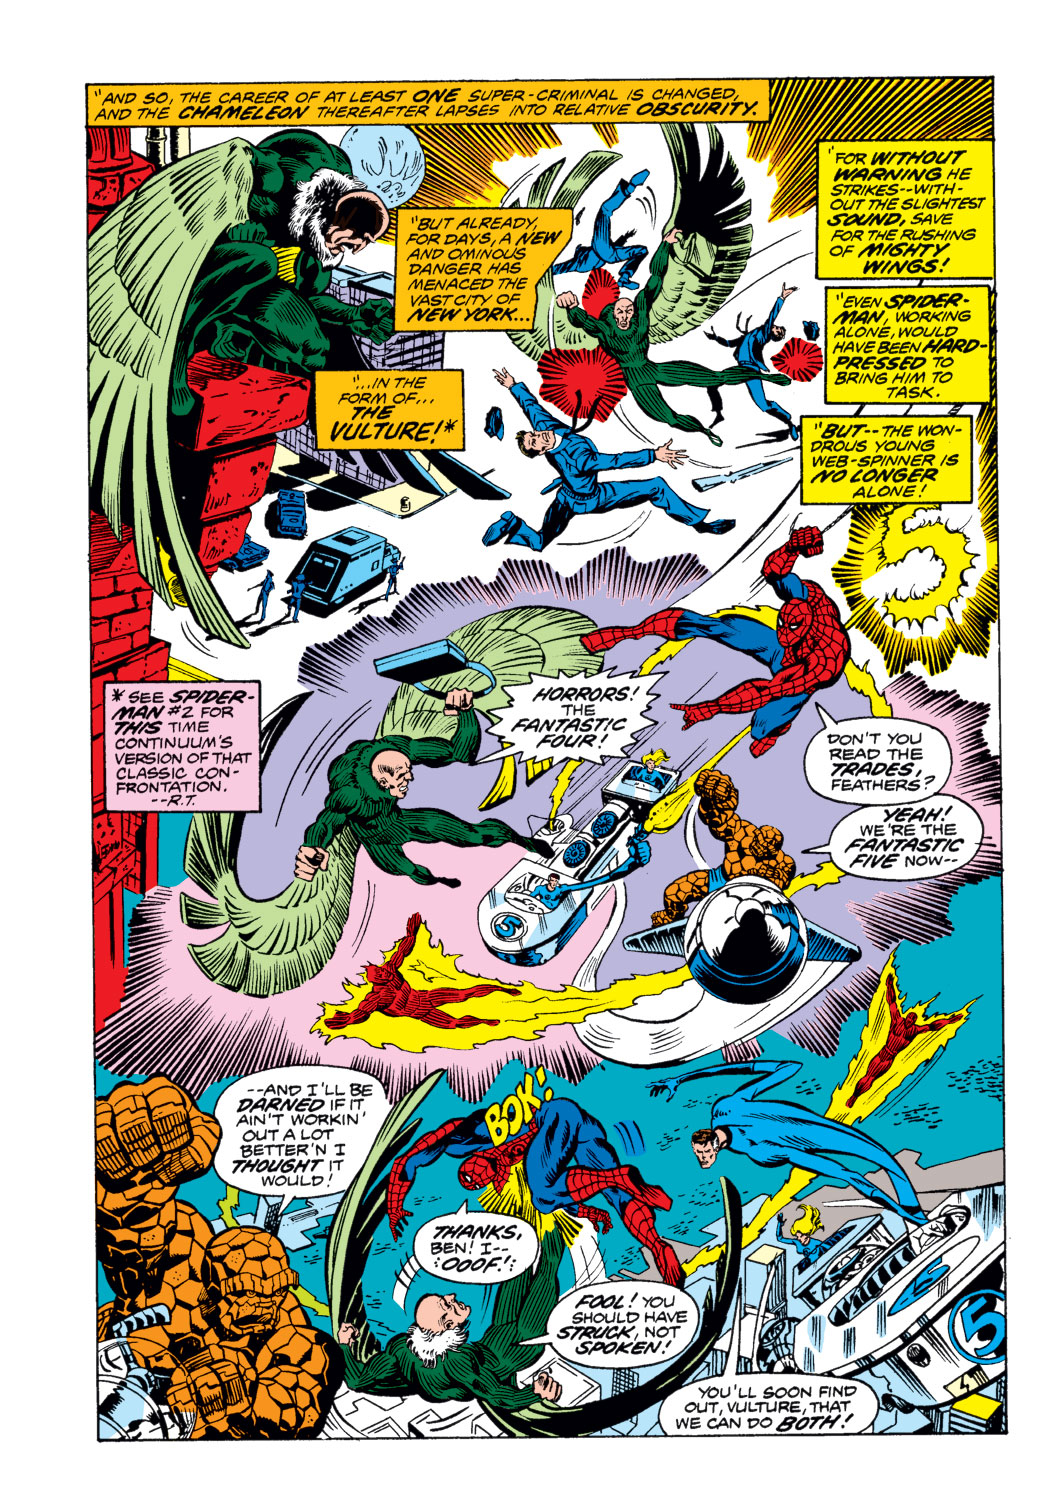 What If? (1977) issue 1 - Spider-Man joined the Fantastic Four - Page 15